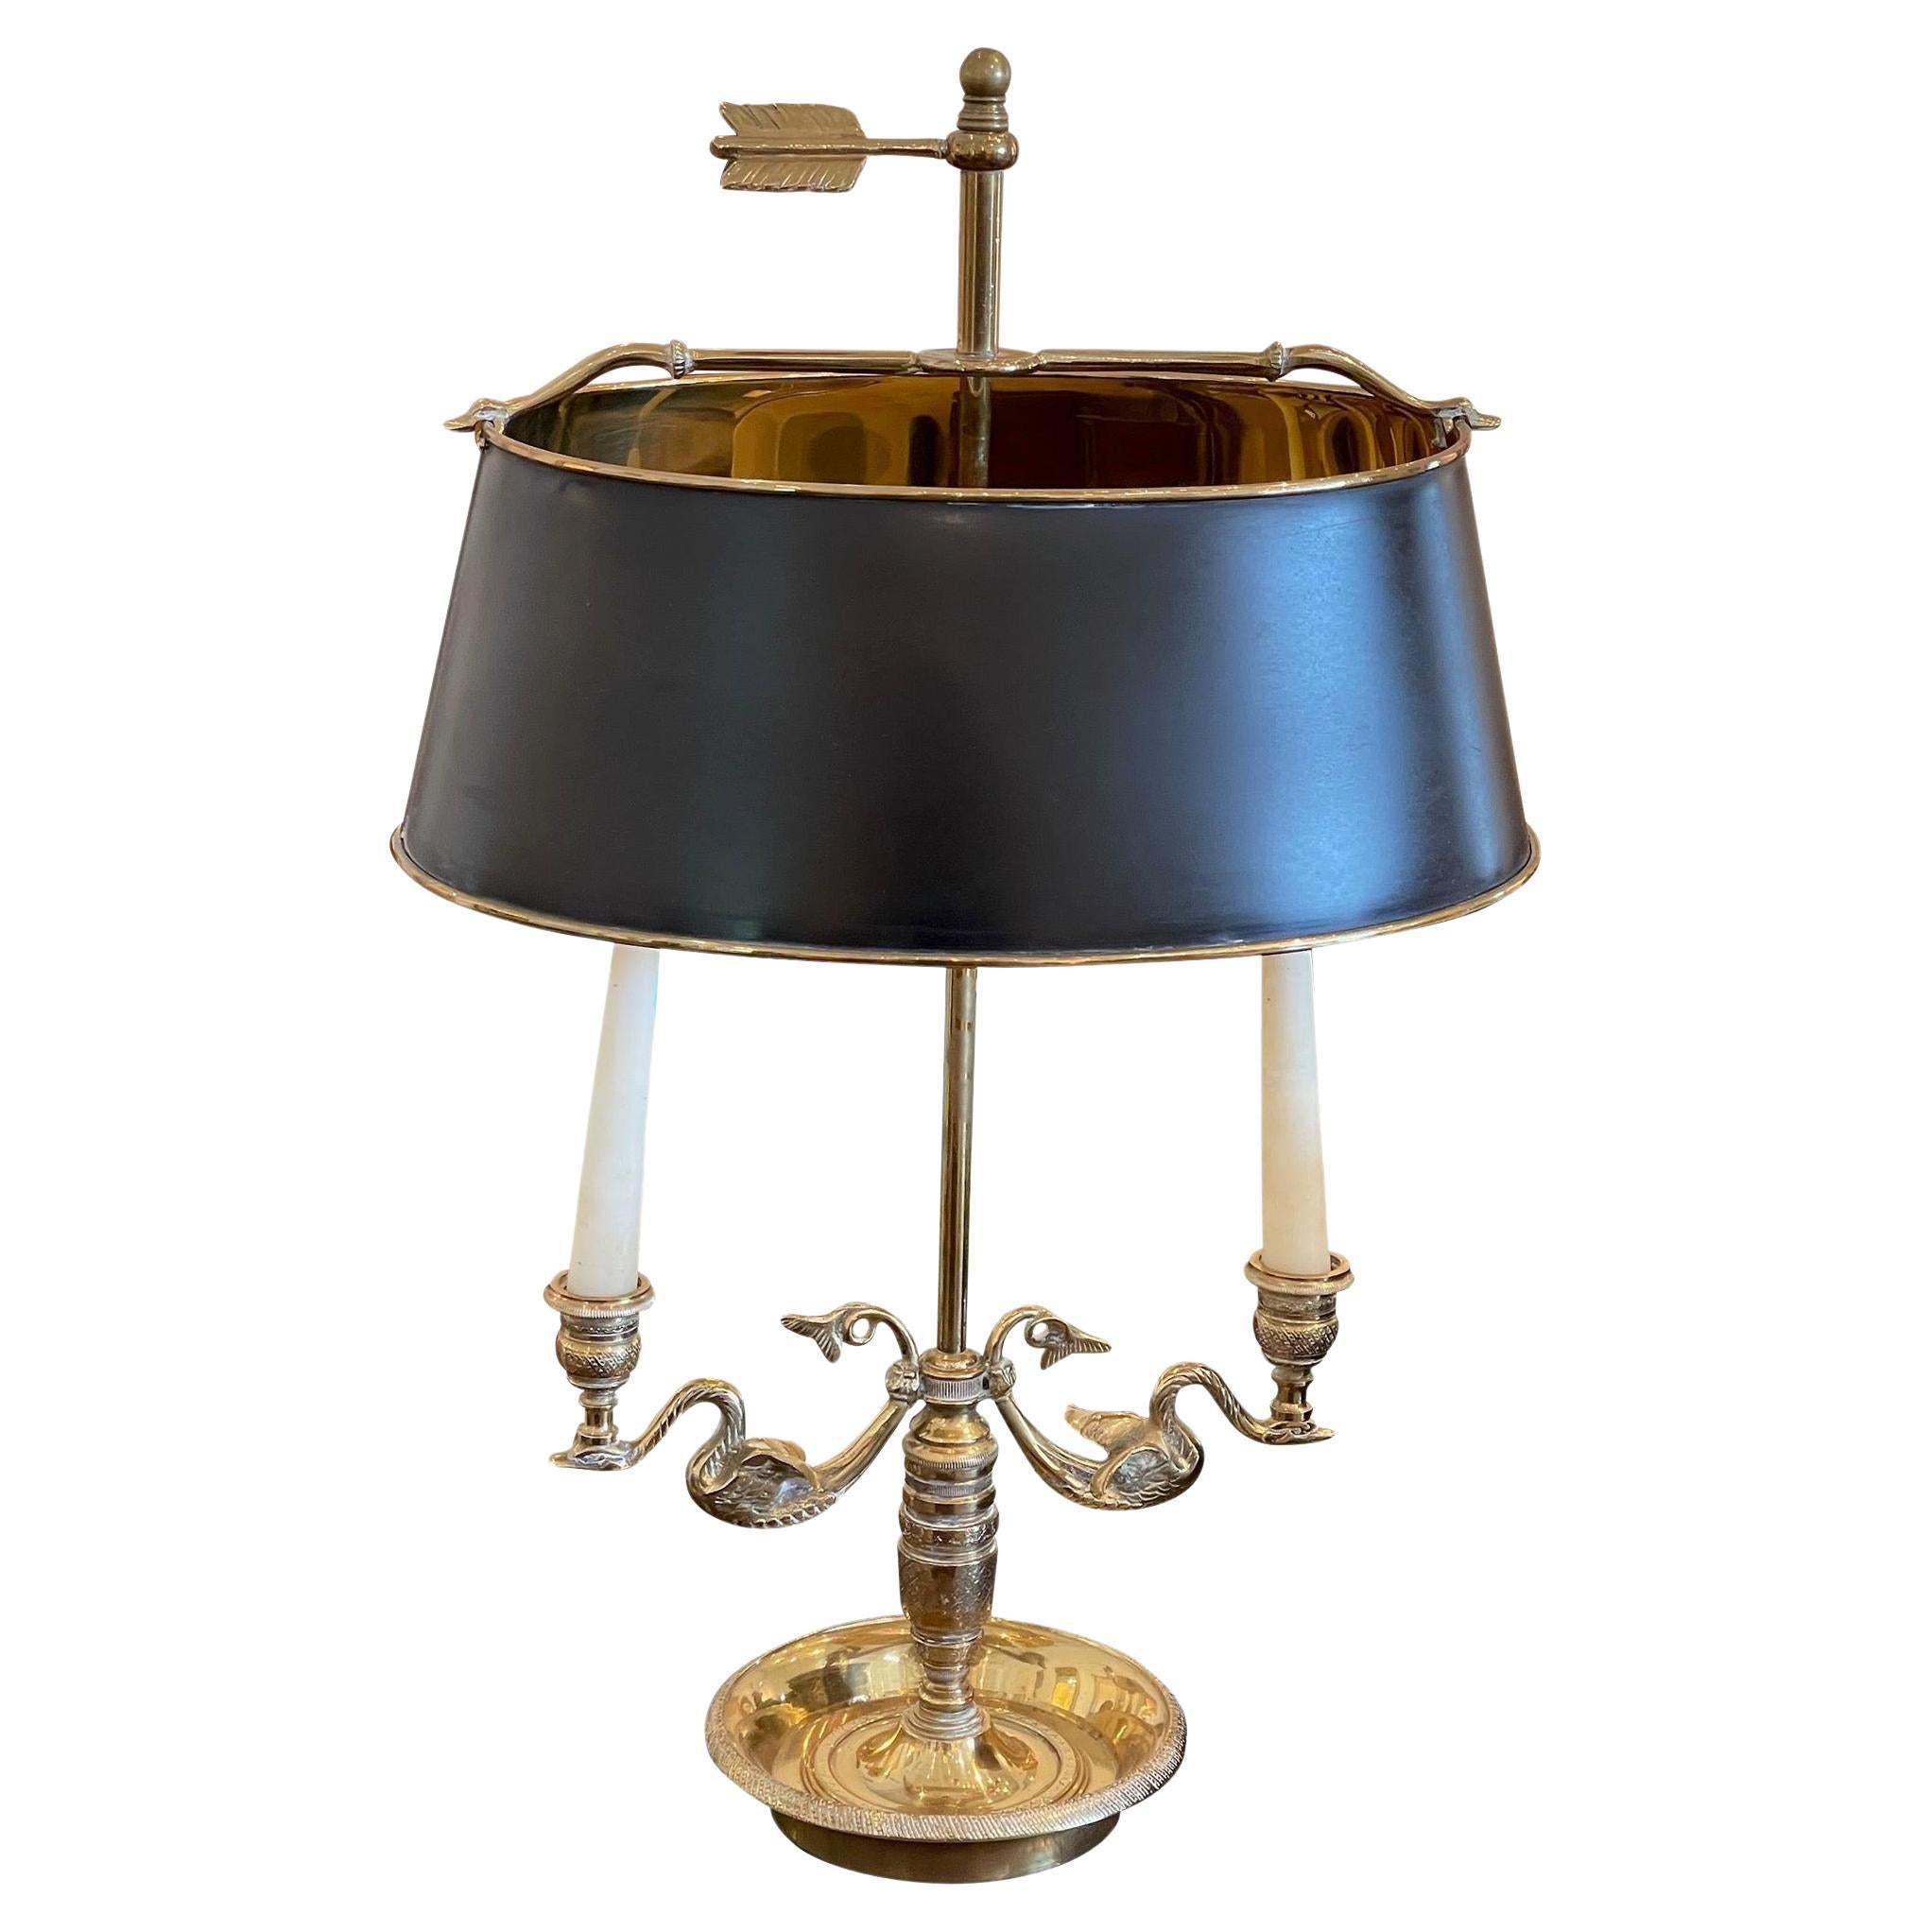 Early 20th Century Bouillotte Lamp With Candle Stick Arms For Sale